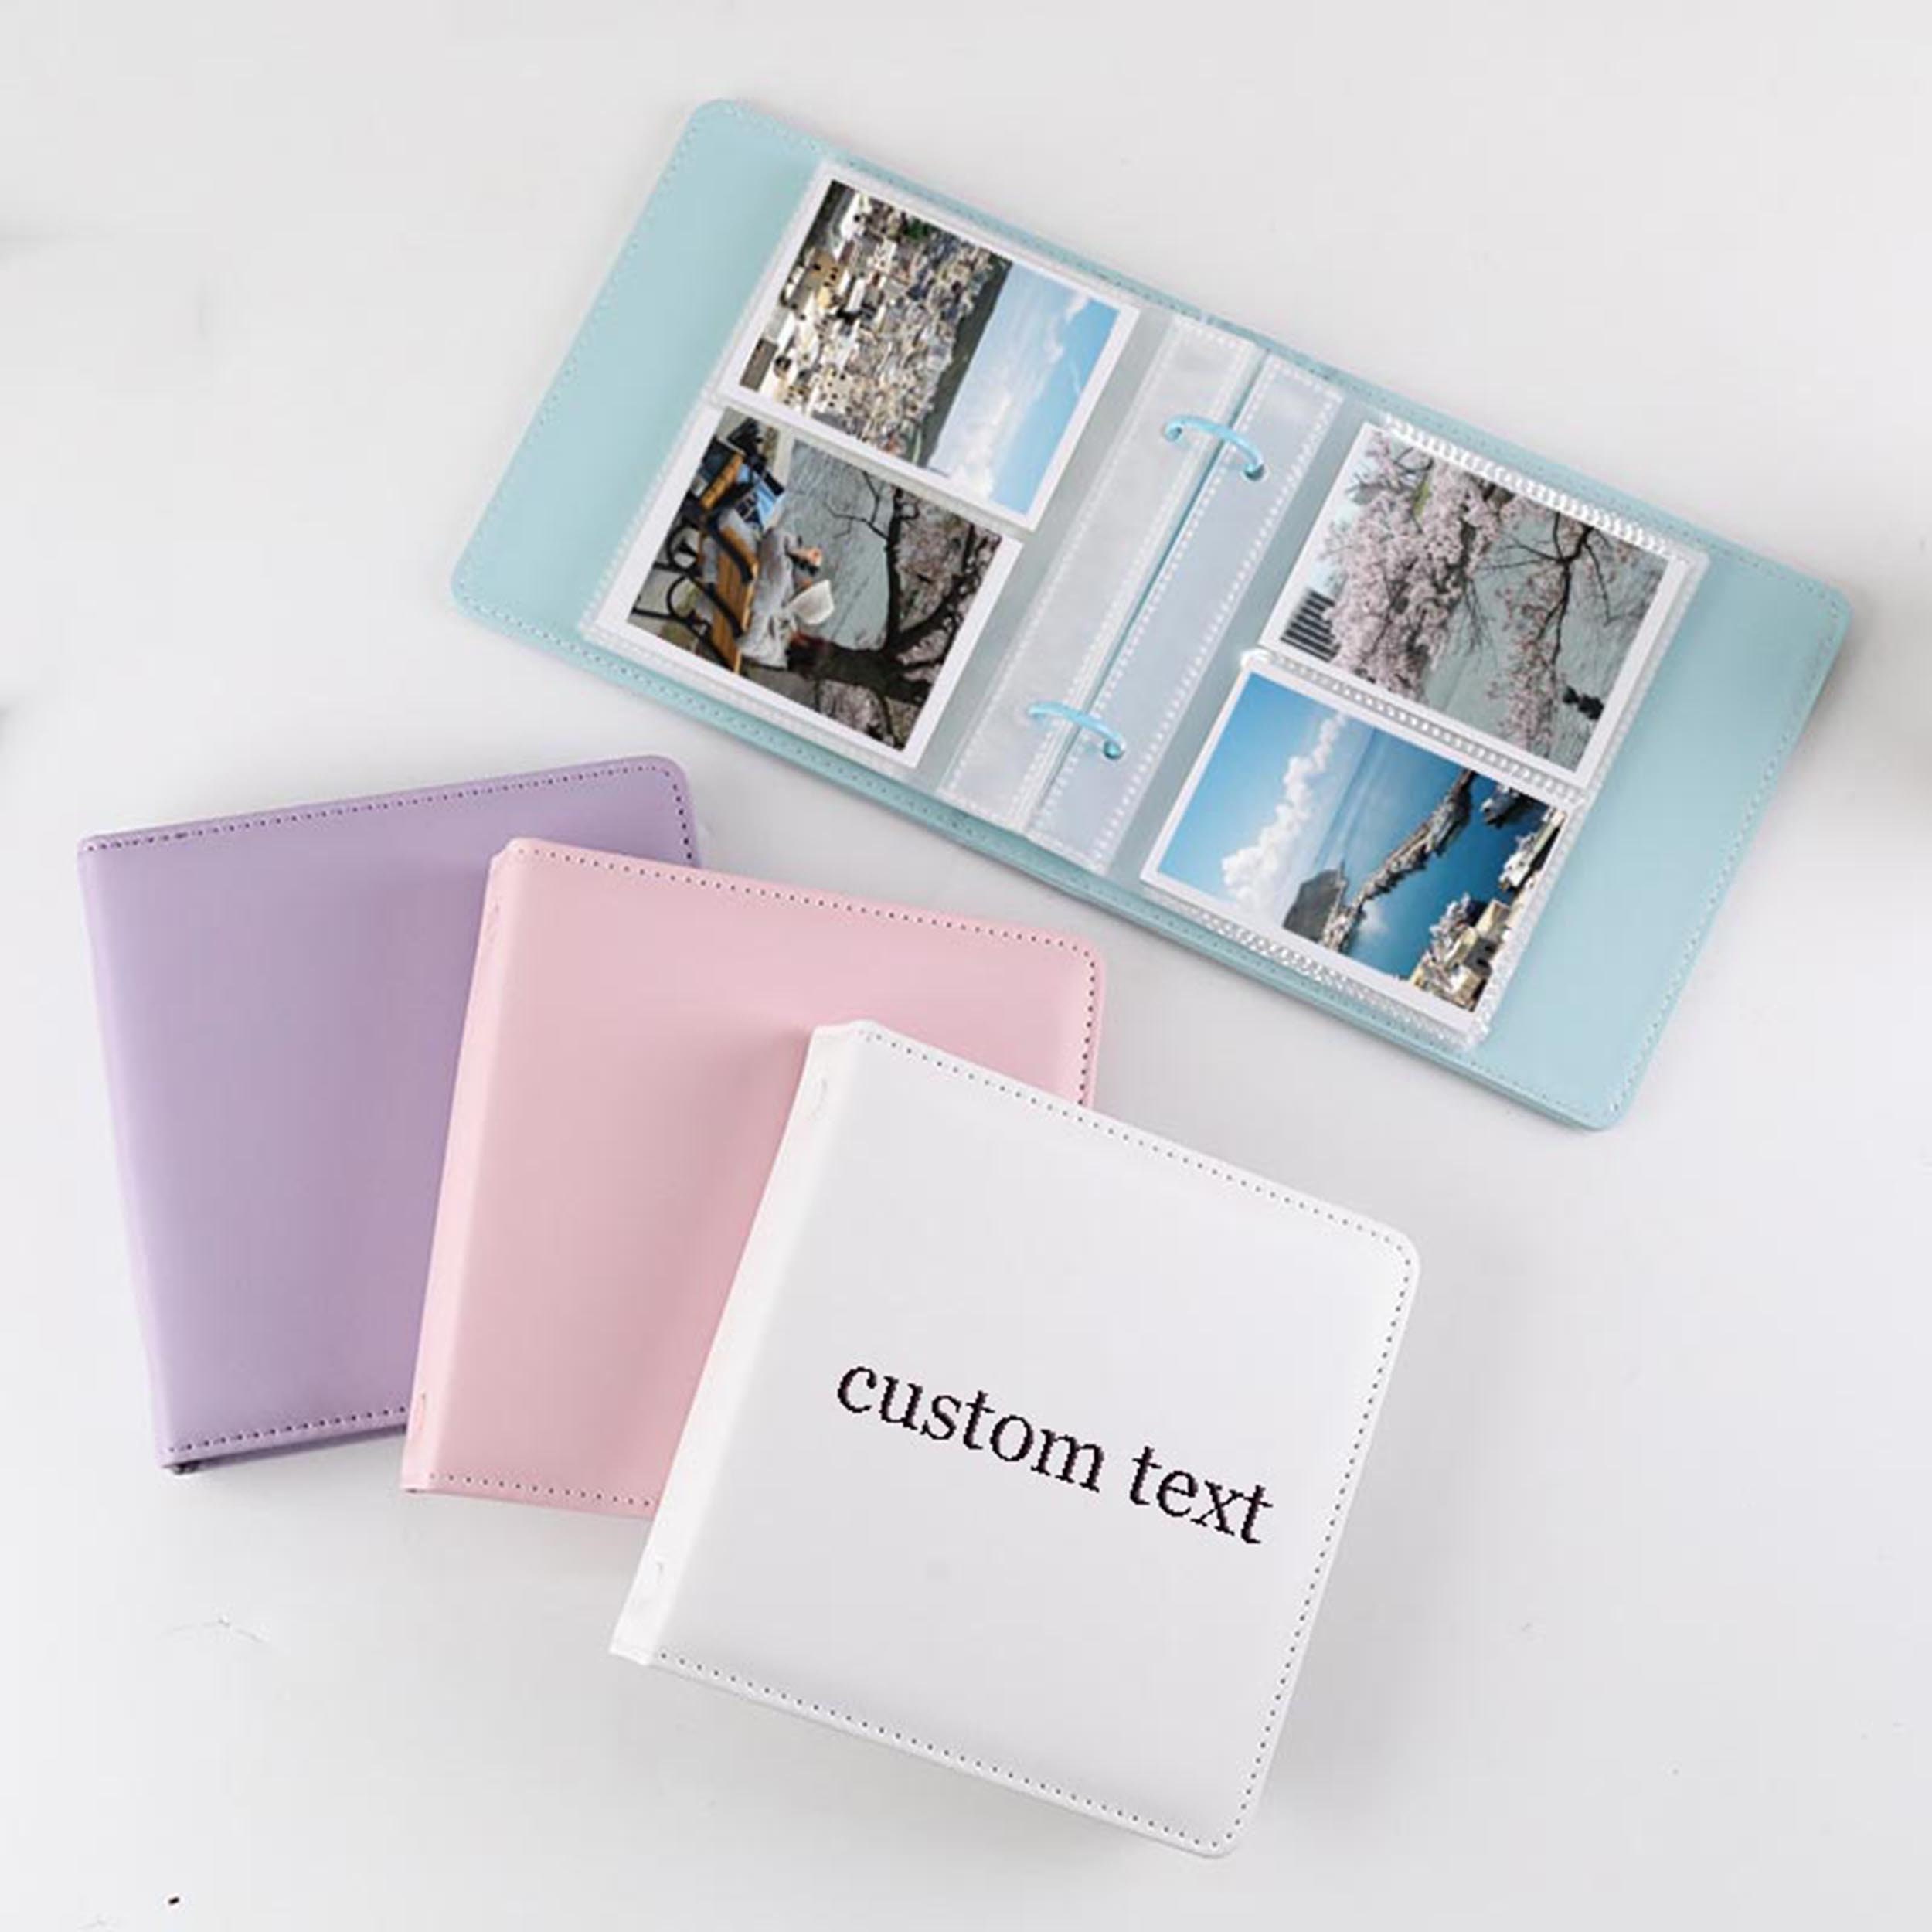 Maverton Photo Album - Customised White Cover with A Photo Frame - 60 Black Pages - Memory Book for Couples - for Parents - P